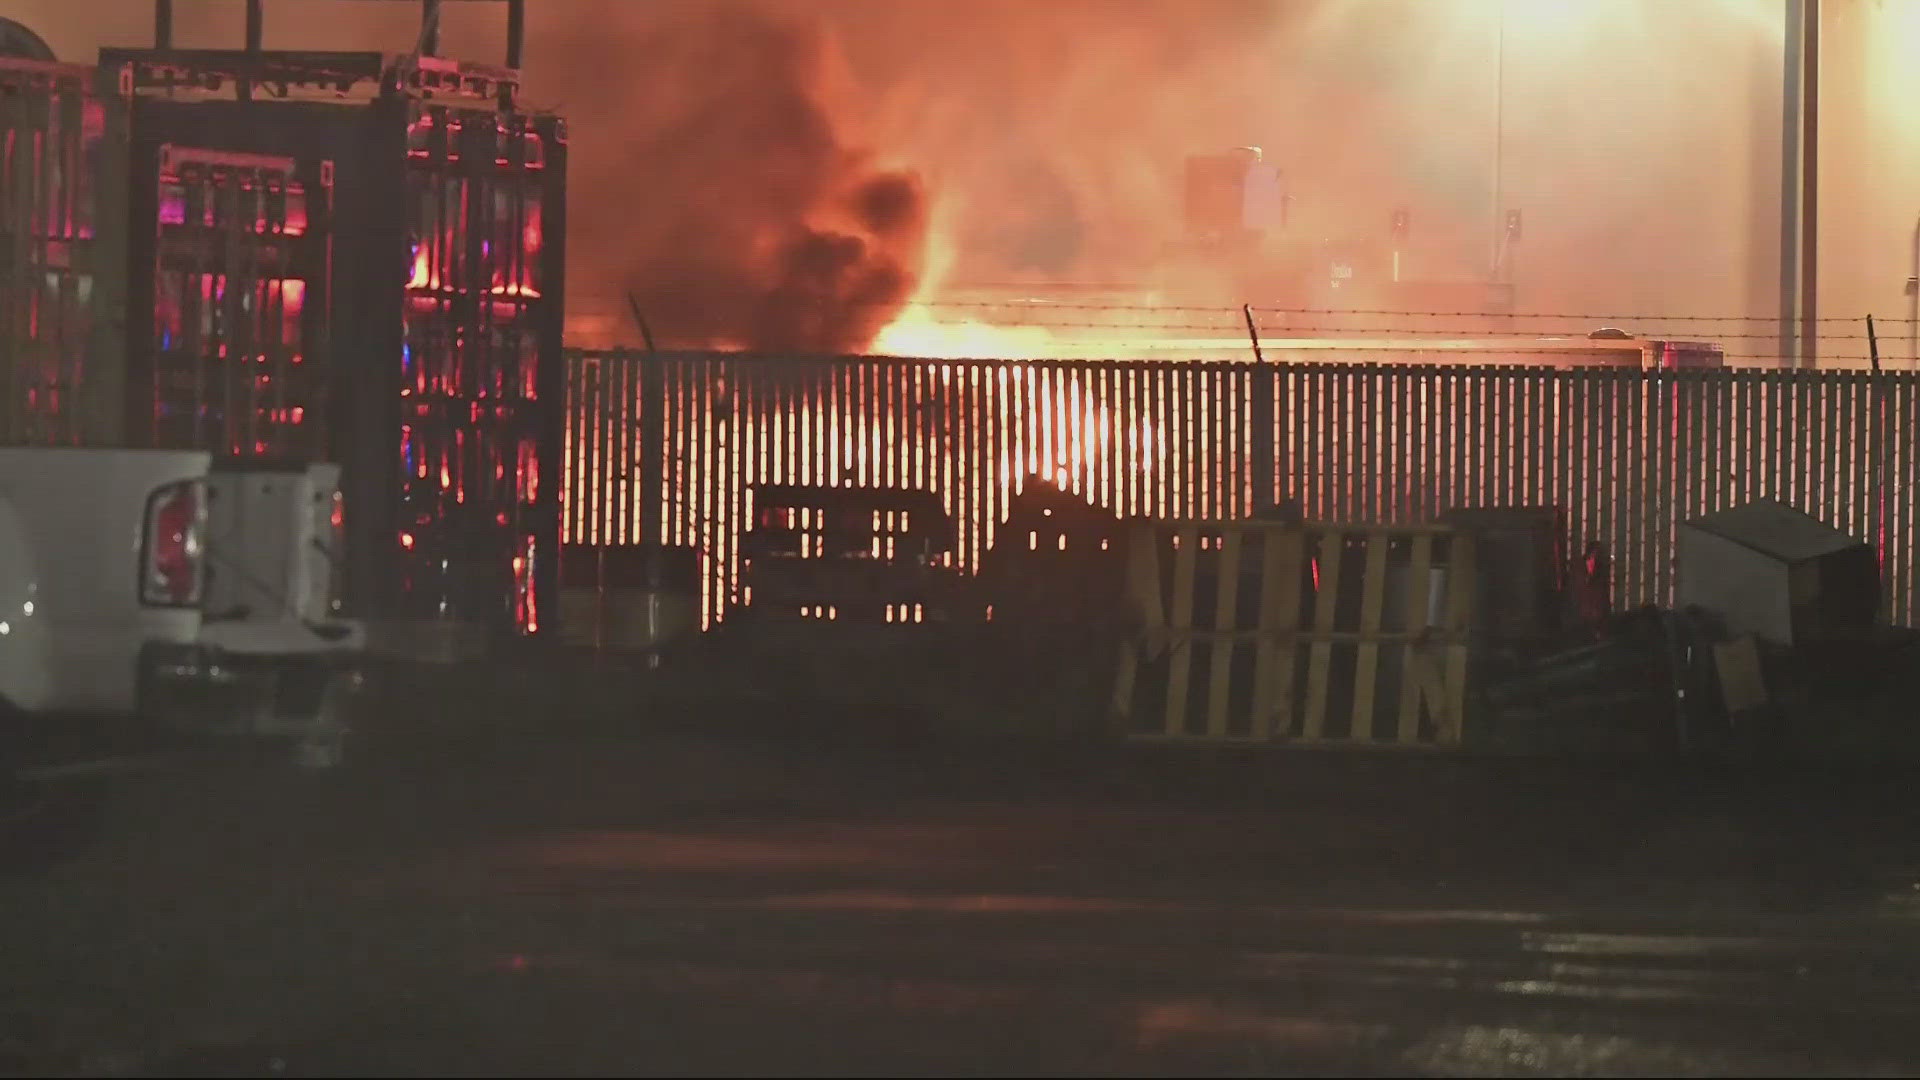 More than a dozen police training vehicles were burned at Portland police's training complex in Northeast Portland. The case is being investigated as arson.